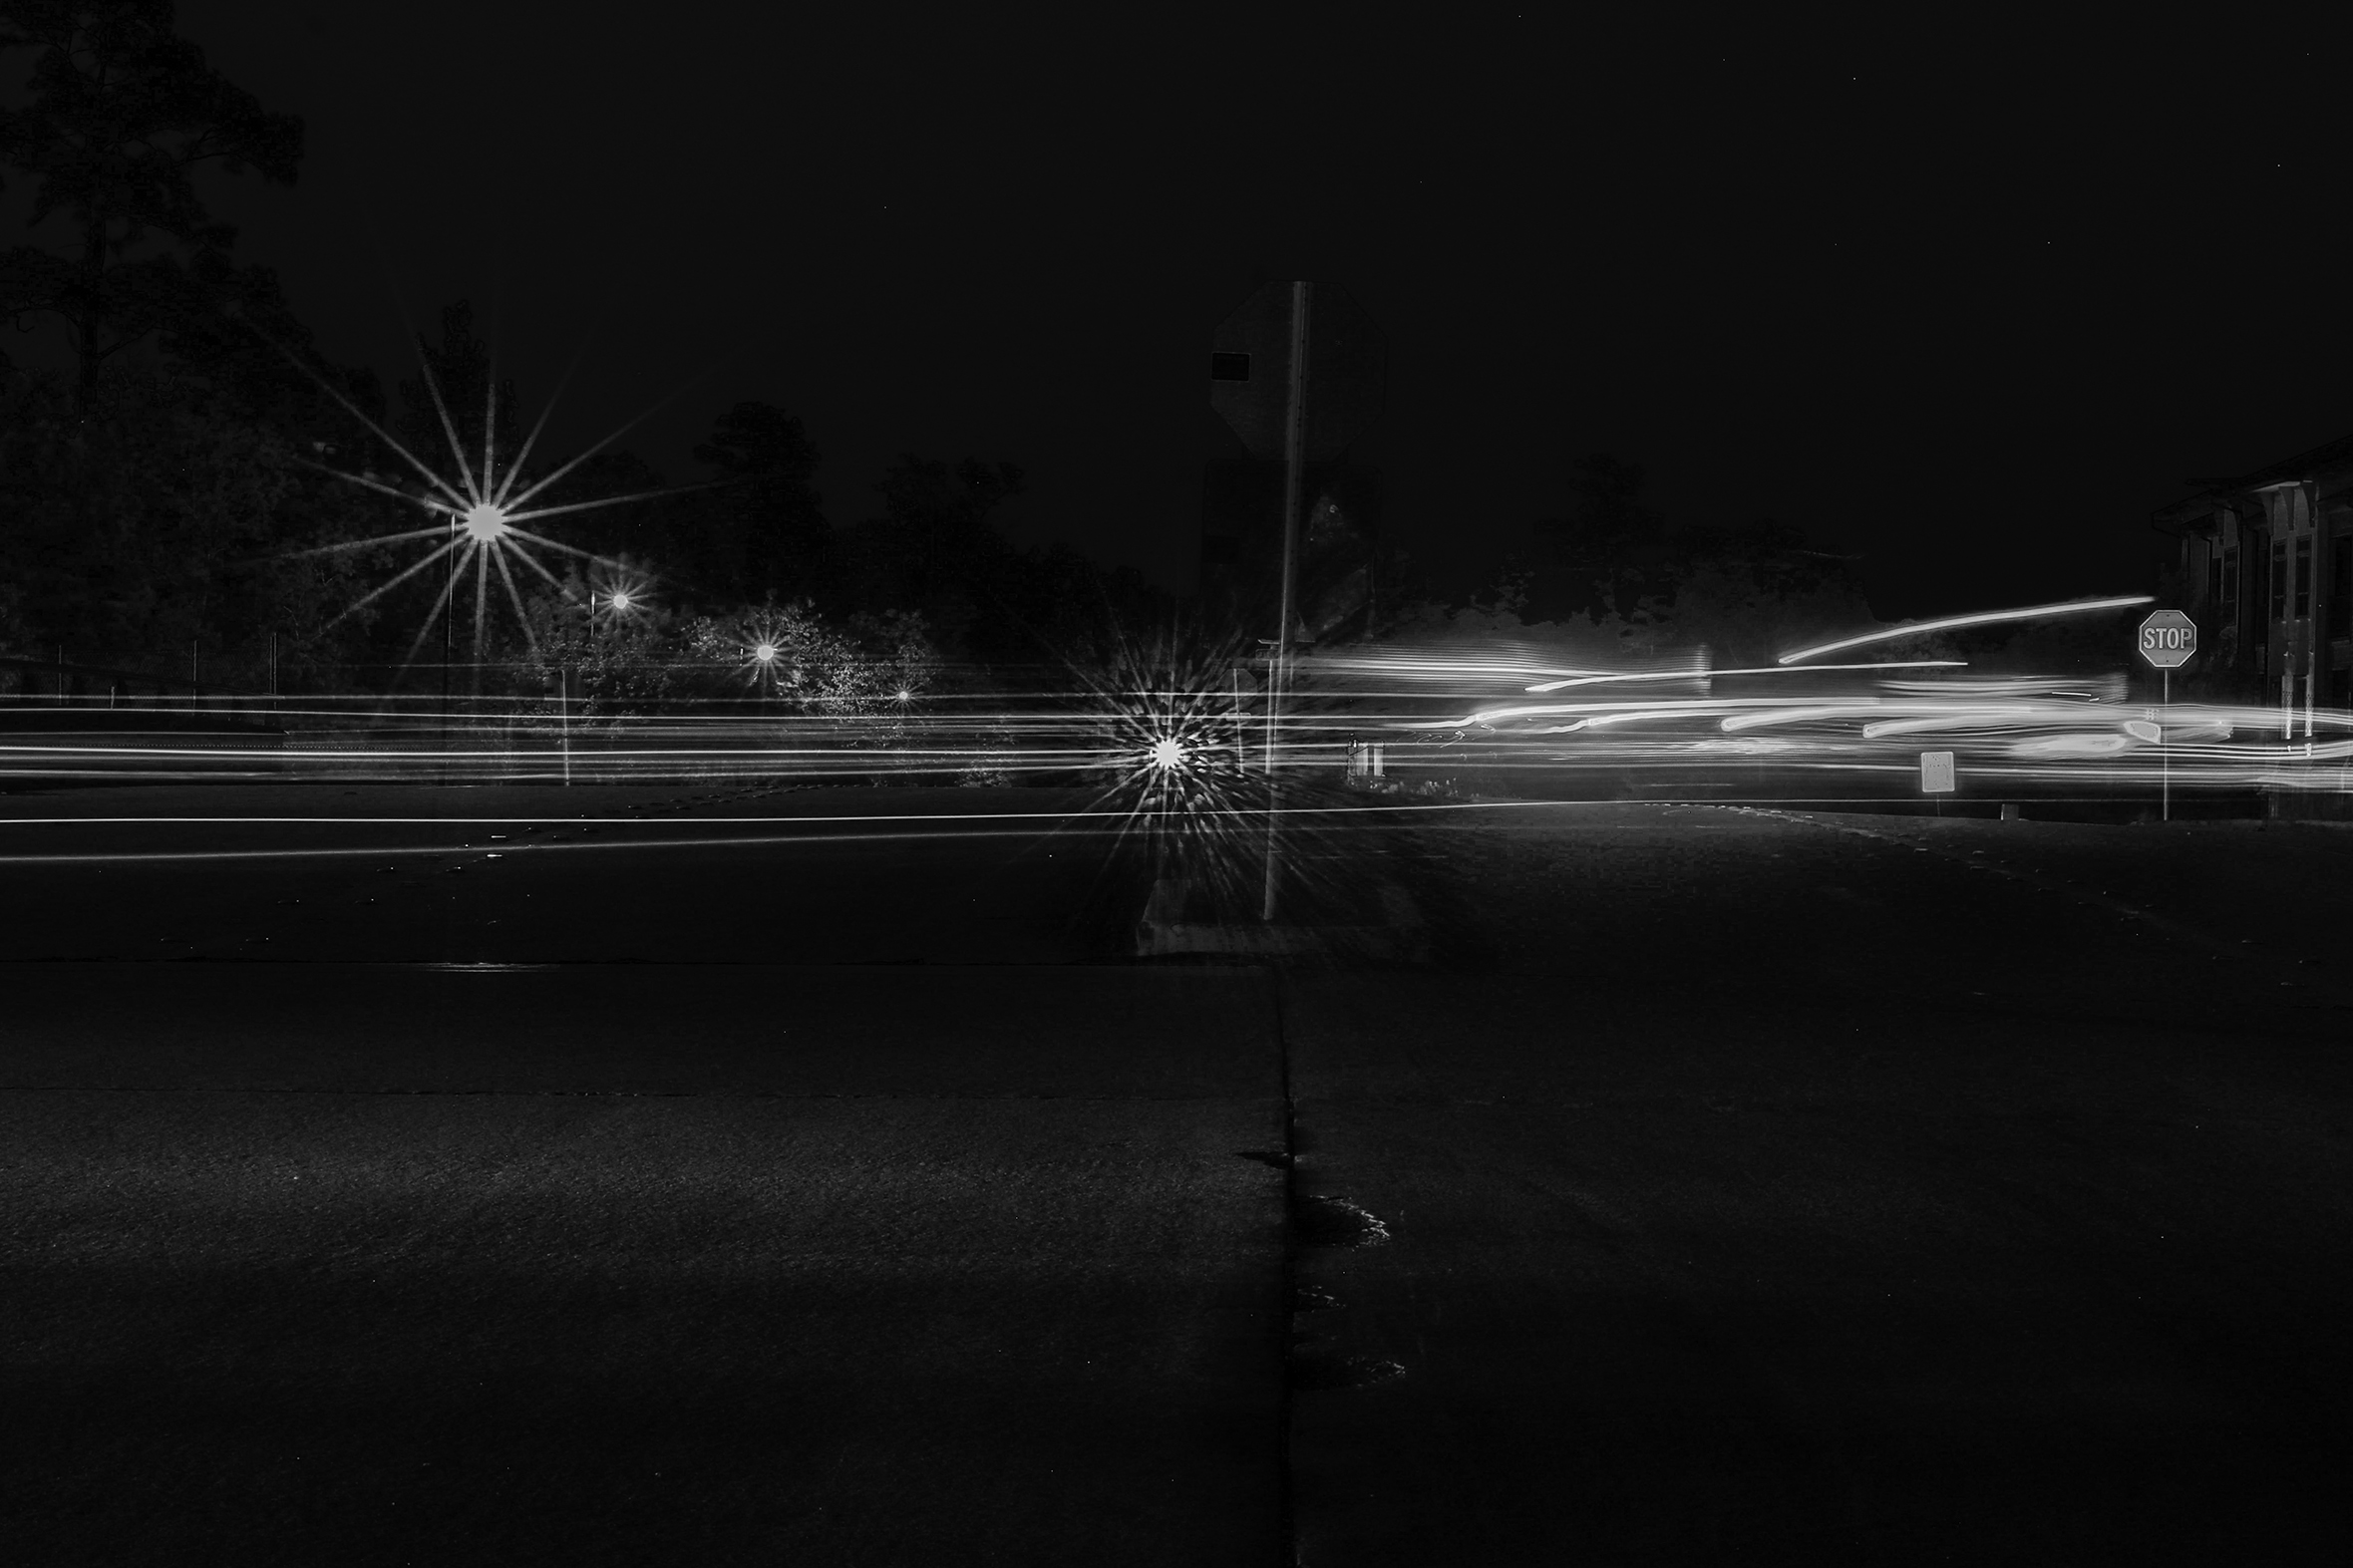 Lights shoot and zoom horizontally across a street against a dark intersection while the stationary streetlights appear as sunbursts retreating into the background.